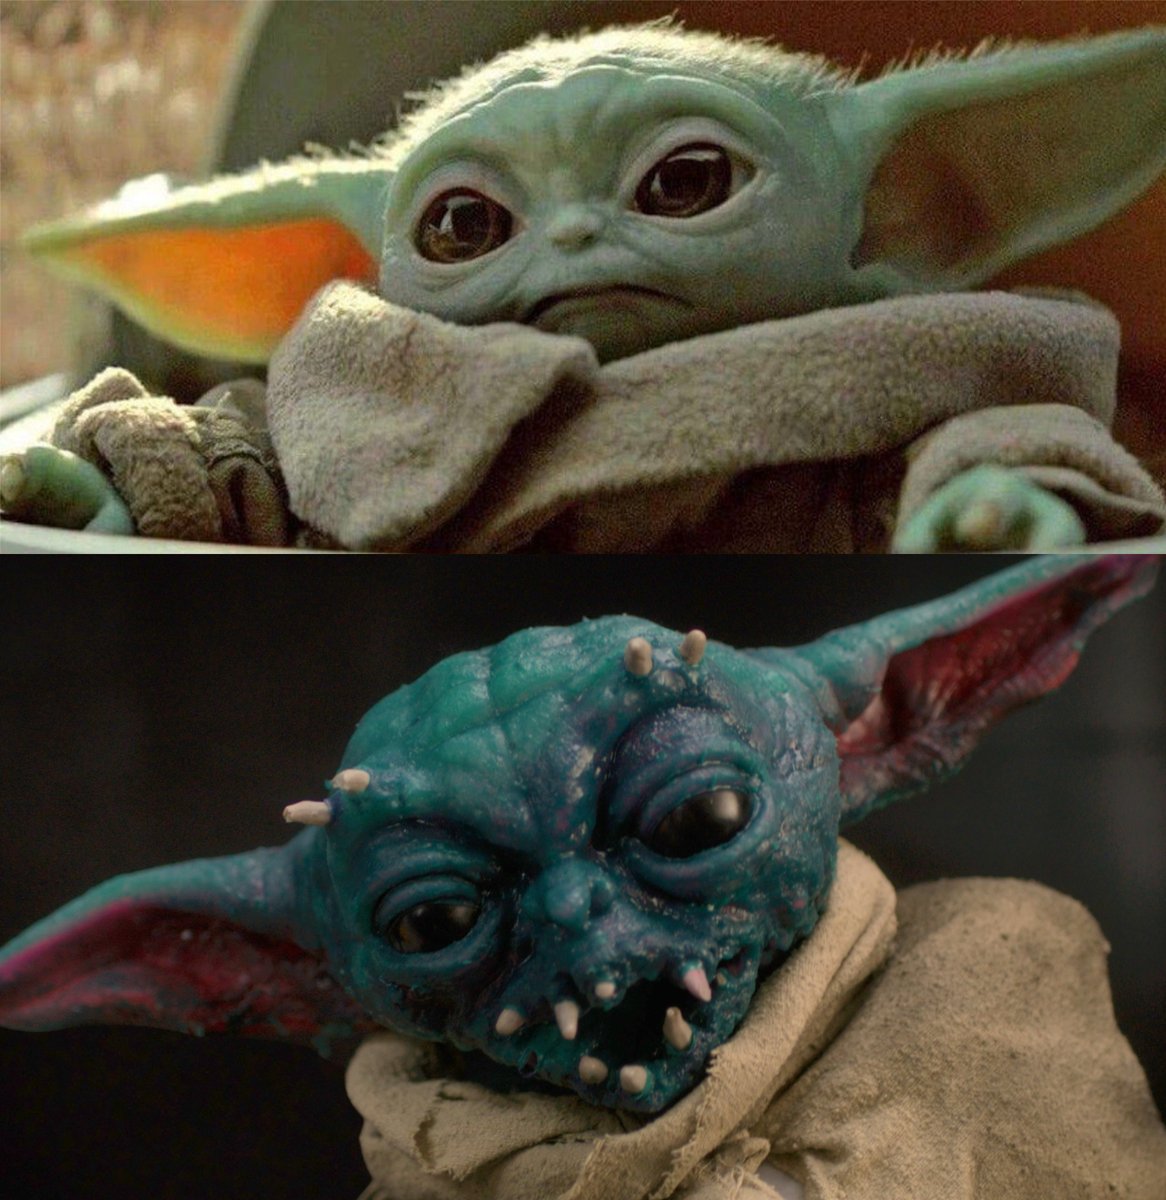 Who has a better name? Grogu or Grimble? 

Watch the first episode of new #SpaceJanitors now: youtube.com/watch?v=8FytLx…

#themandolorian #grogu #babyyoda #spaceballs #maythefourthbewithyou #starwarsfan #spoof #scificomedy #newtvshows